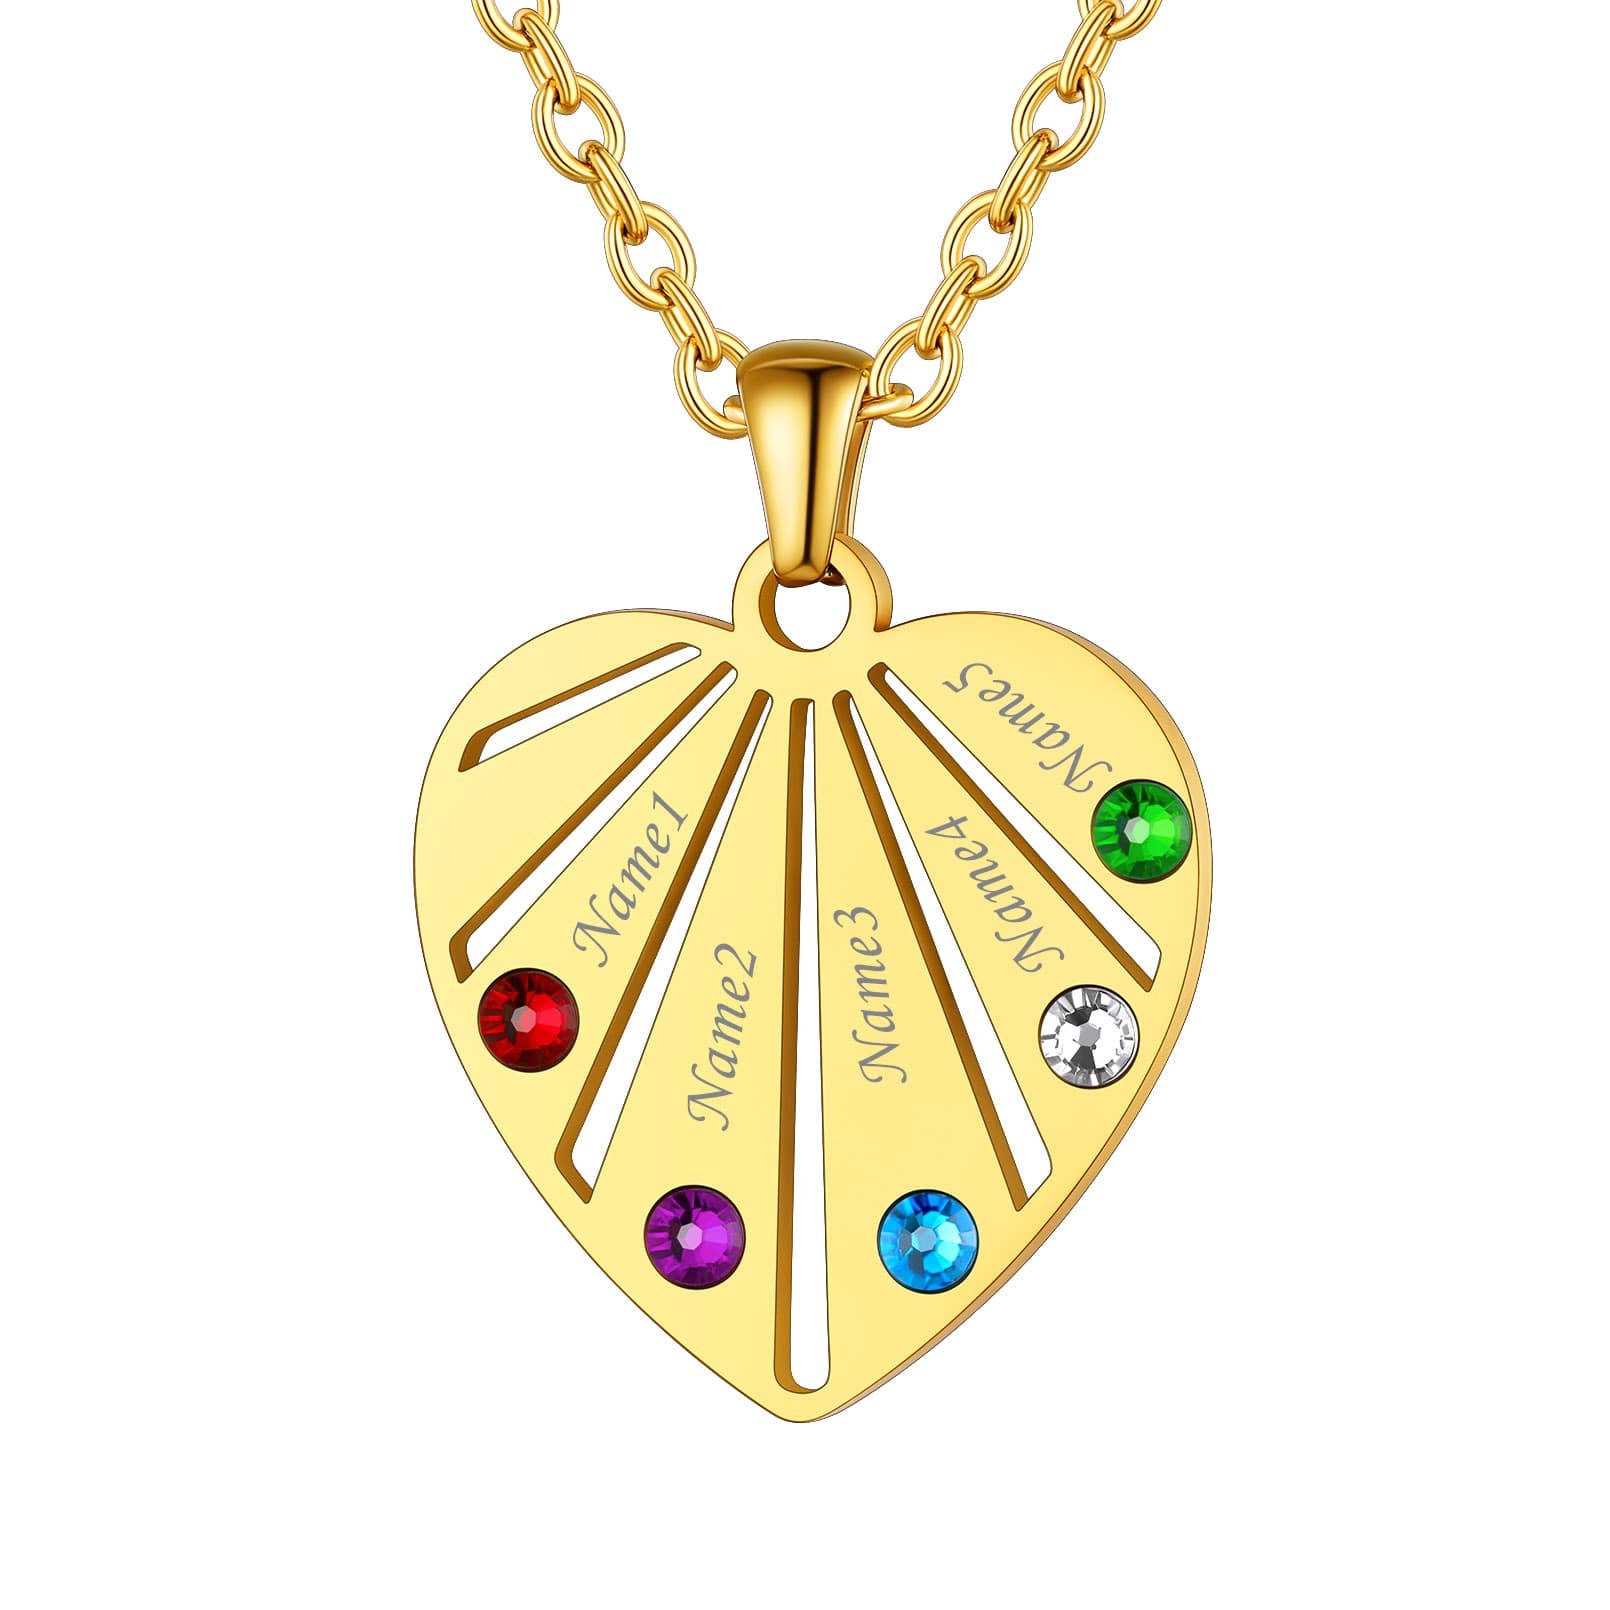 Personalized Engraved Heart Birthstone Necklace